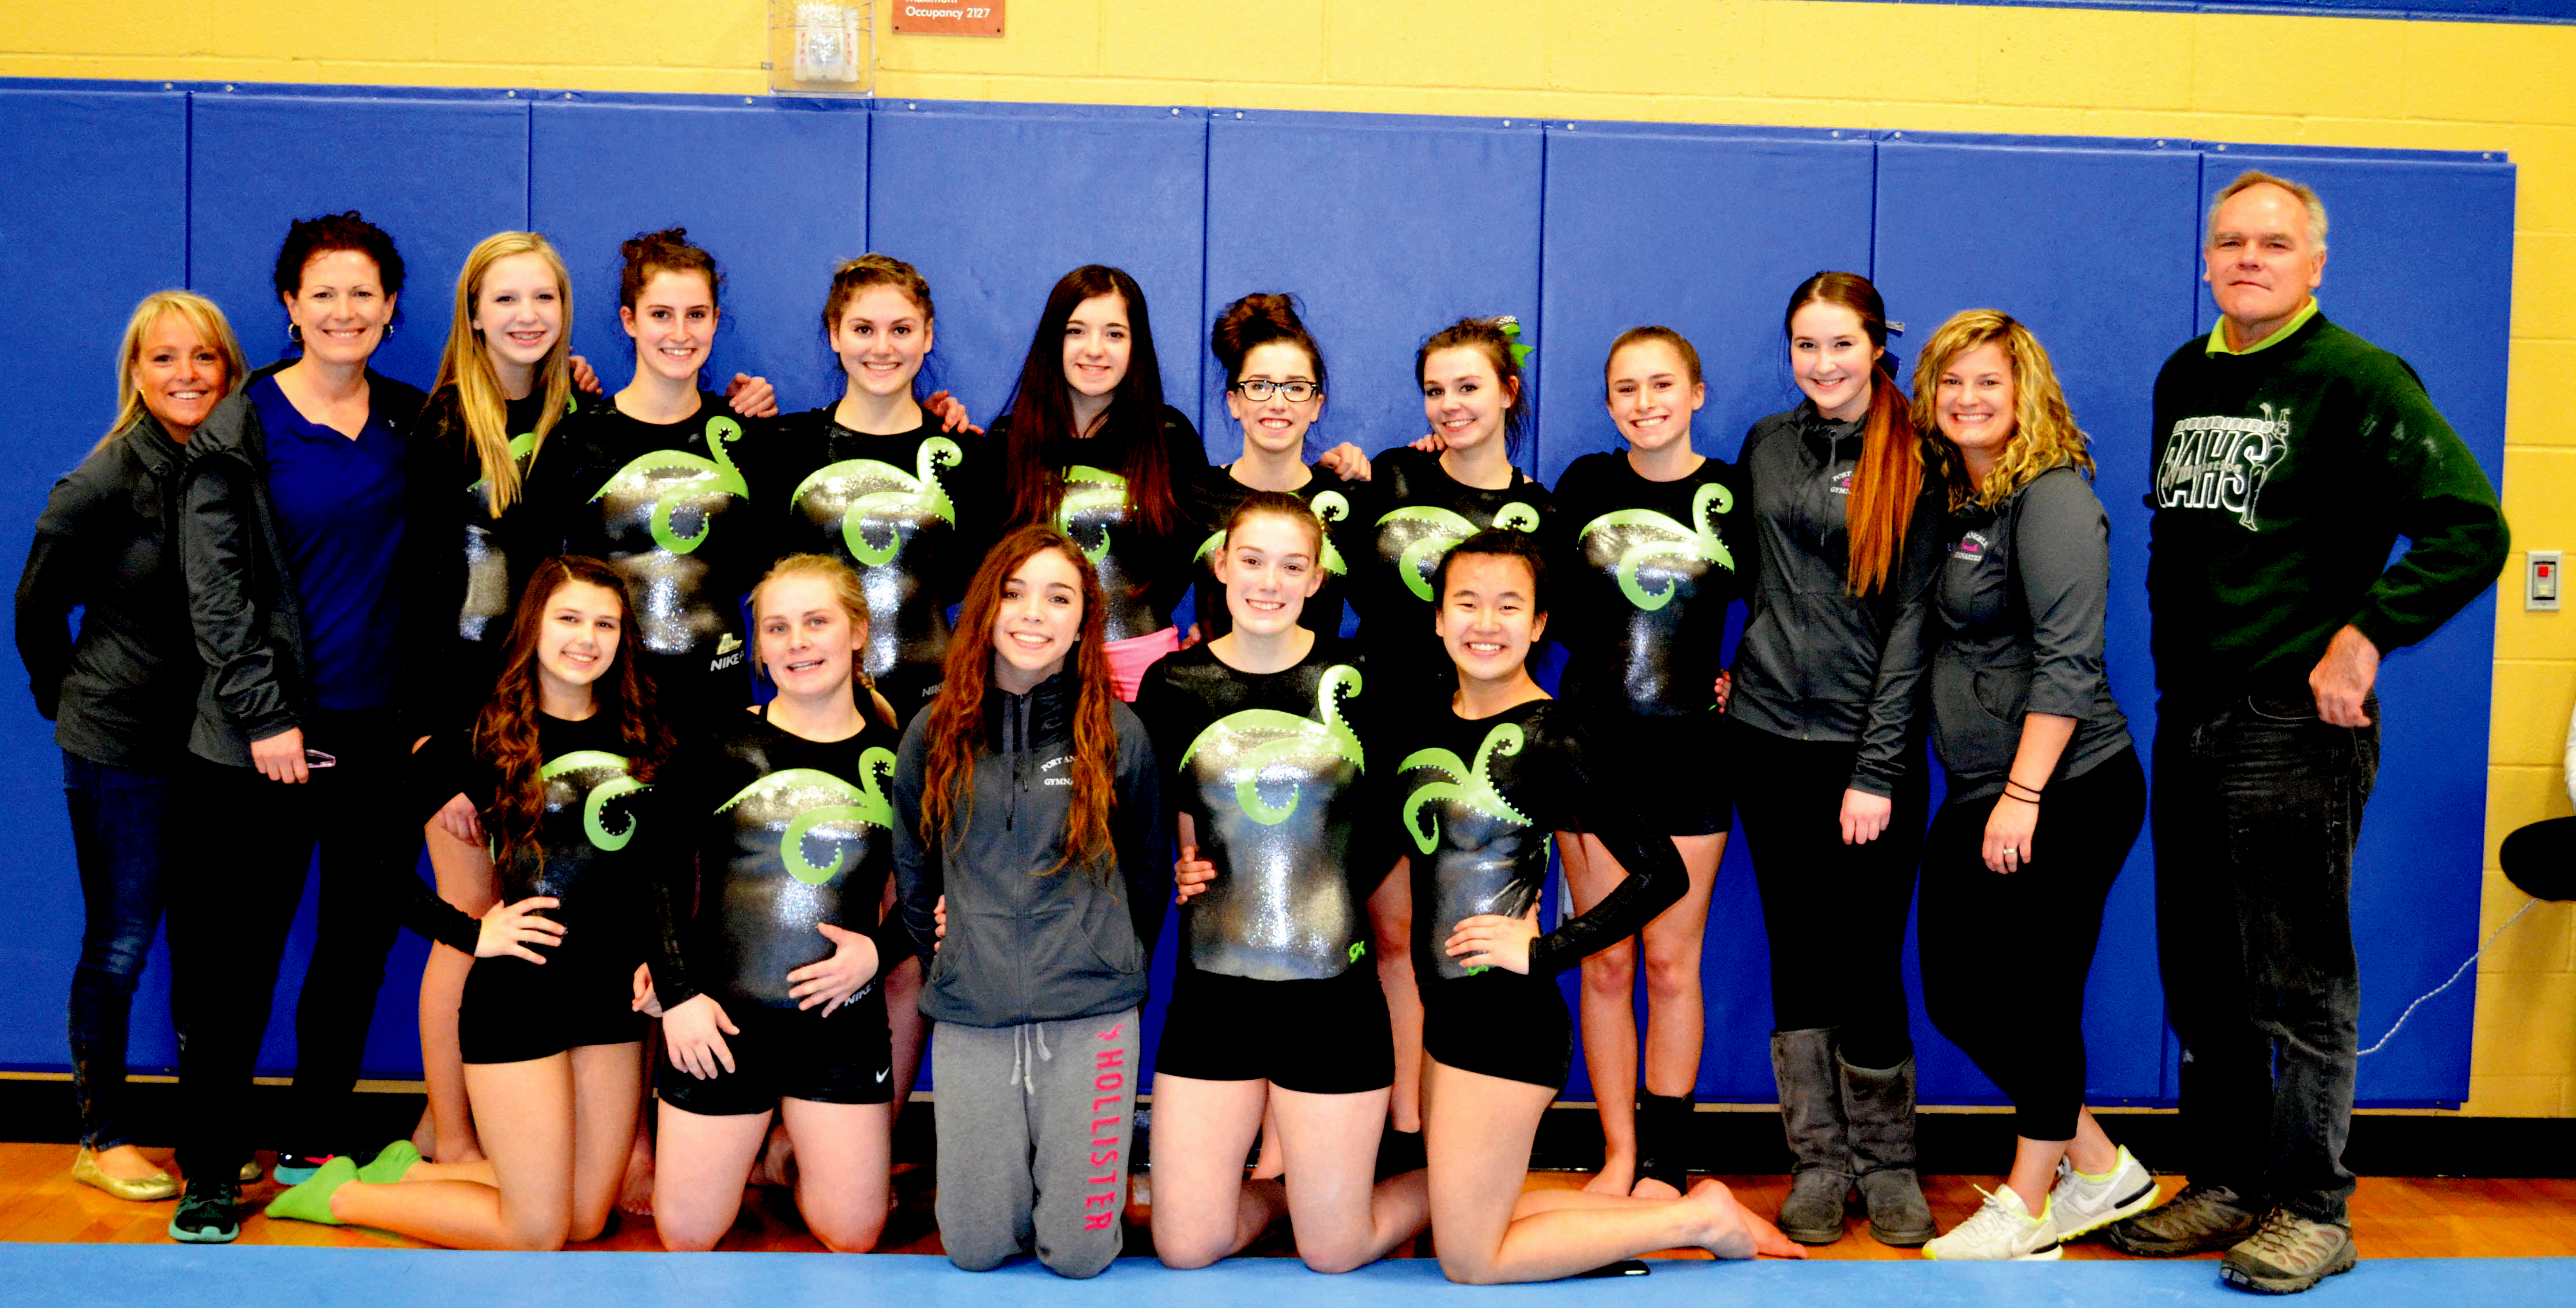 The Port Angeles gymnastics team qualified for state by placing third at regionals in Des Moines. The team is